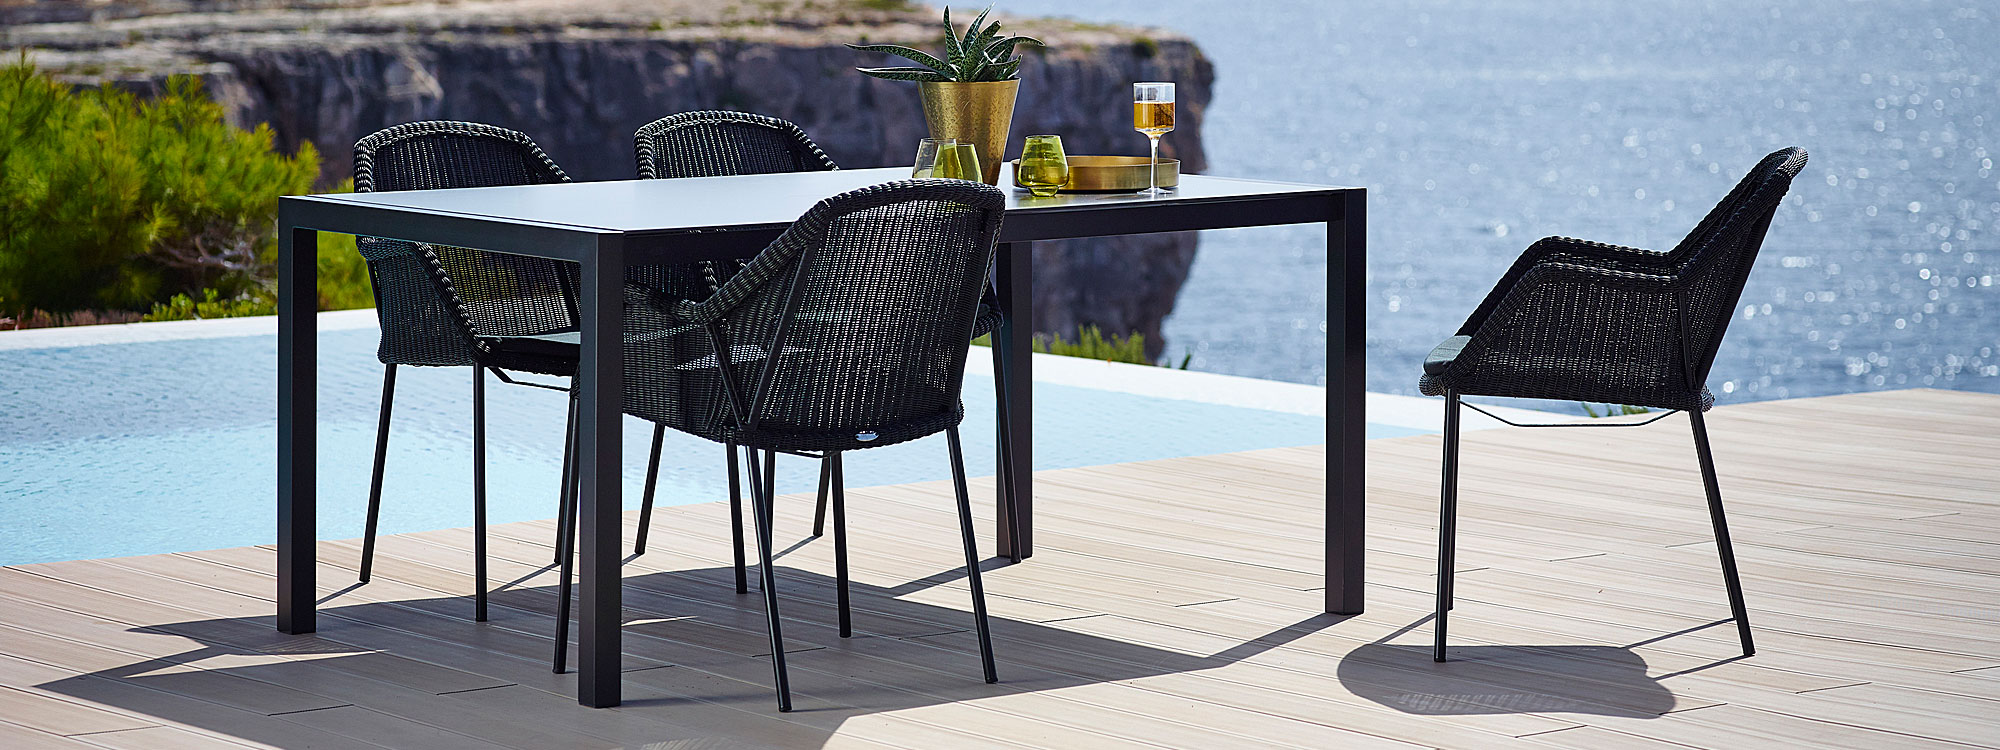 Image of black Cane-line Breeze chairs around a black dining table on cliff-top terrace